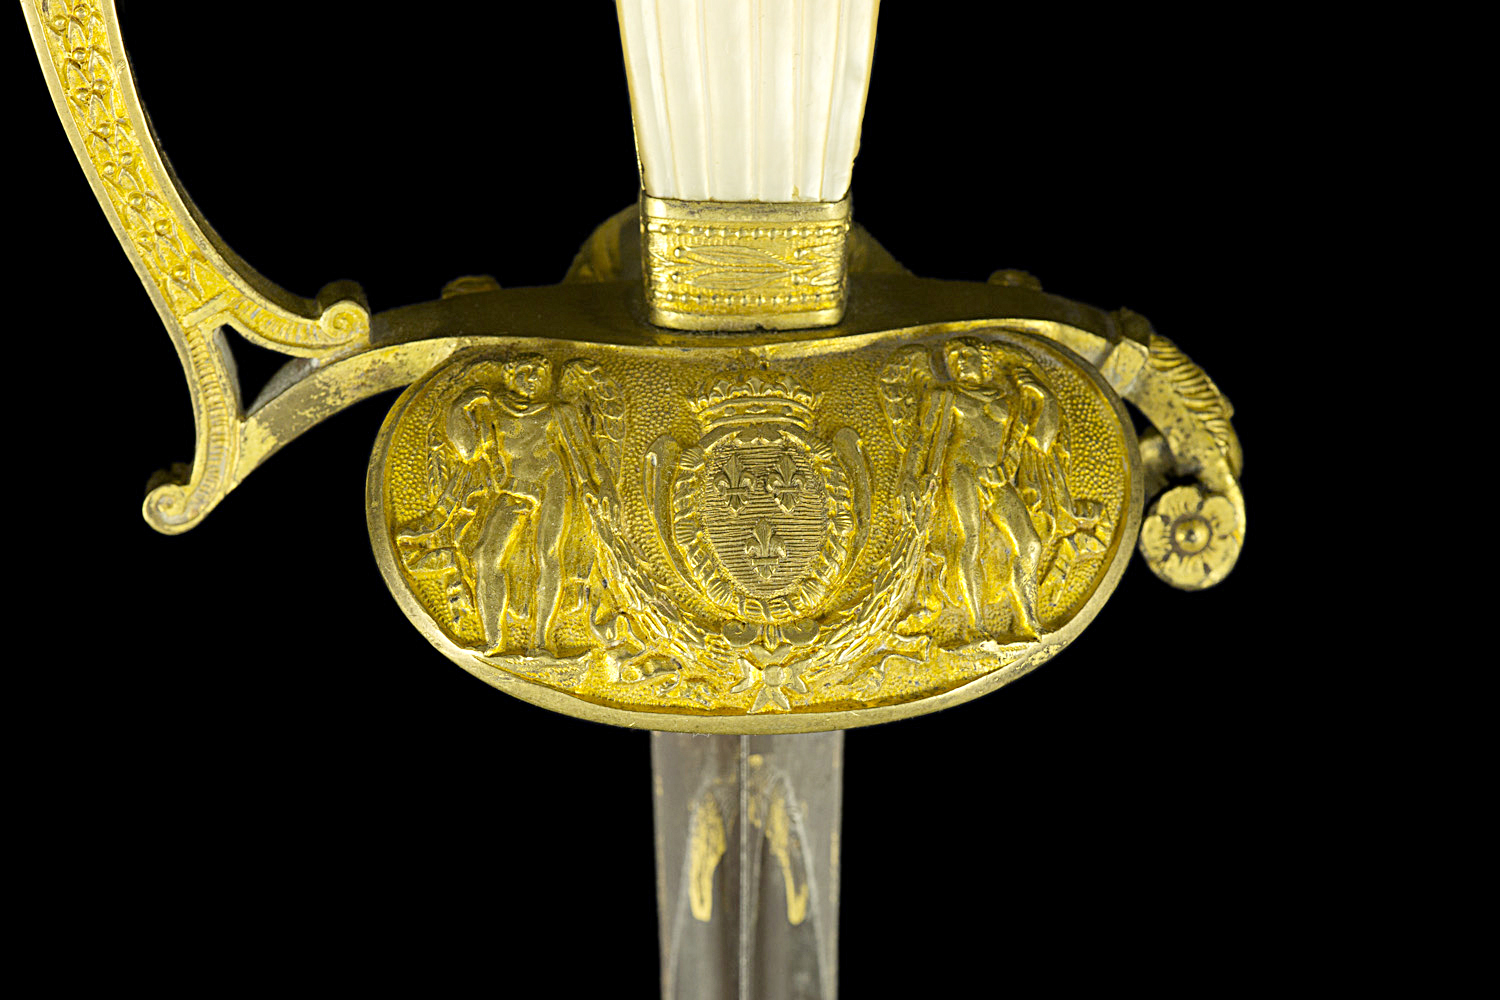 S000143_French_Court_Sword_Detail_Shell_Obverse